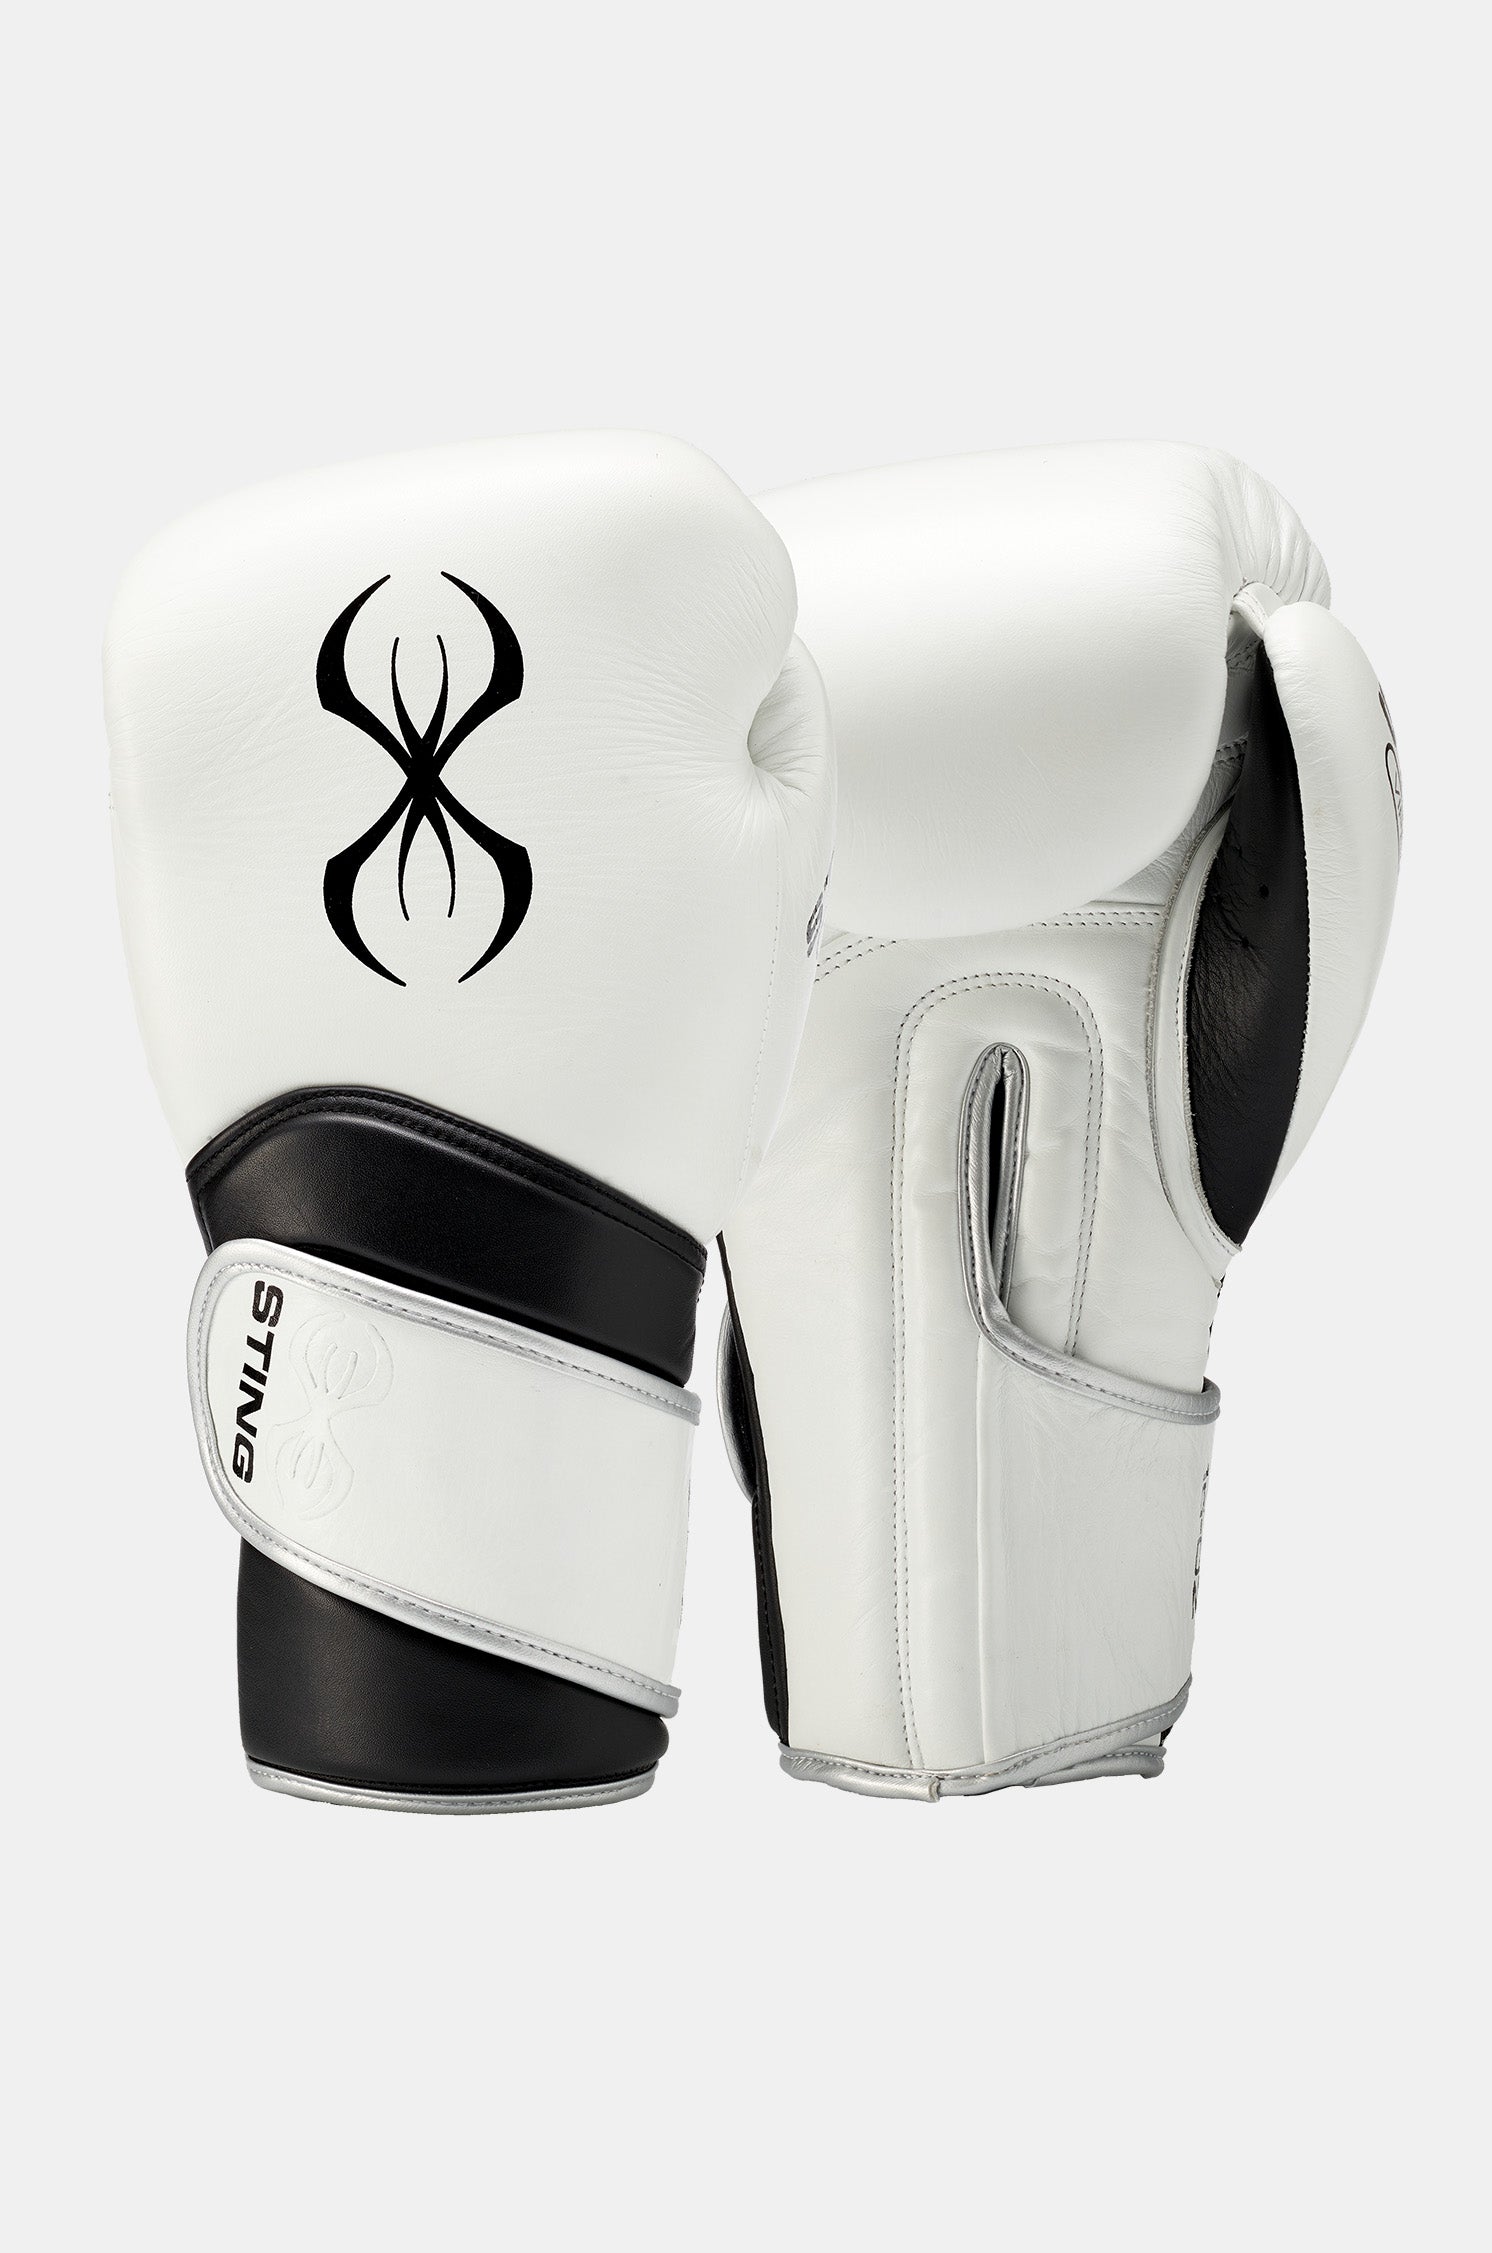 Viper X Boxing Sparring Glove - Velcro